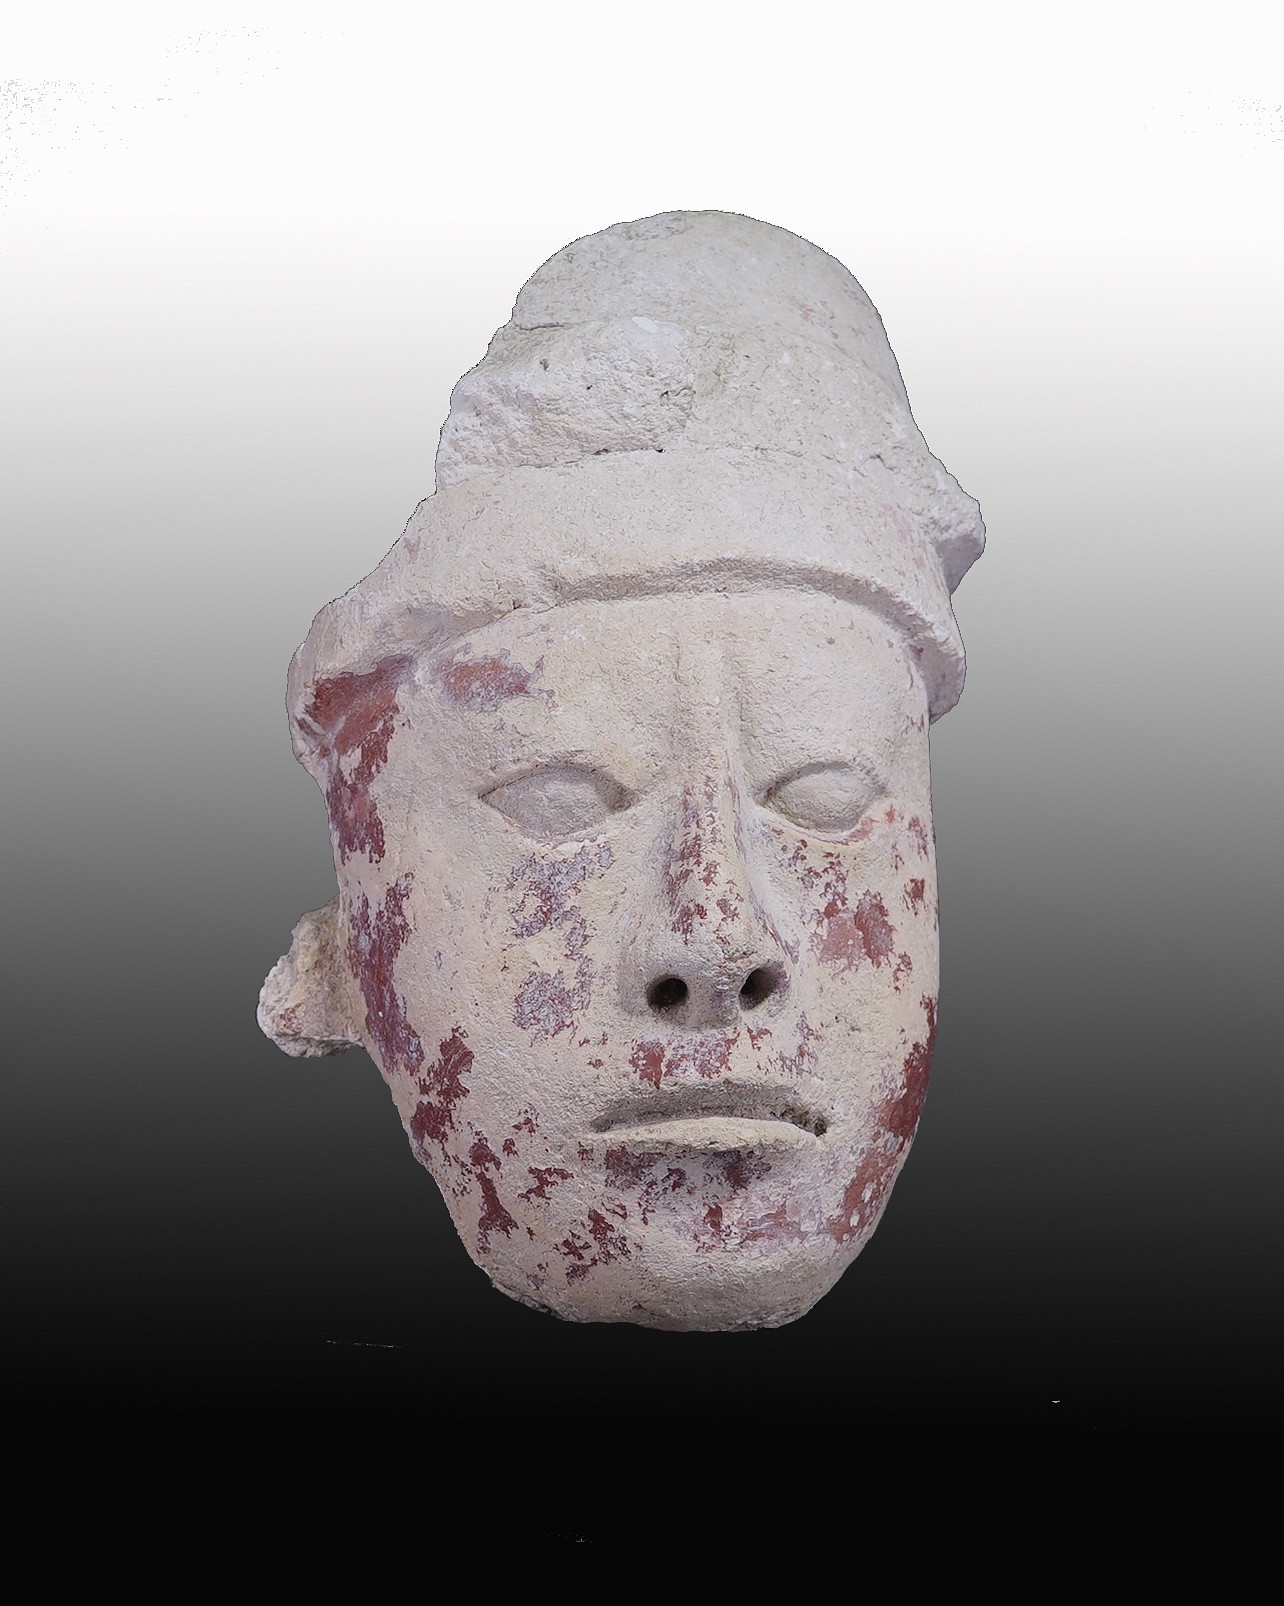 Mexico, Mayan Stucco Face of a Ruler
This Mayan ruler wears stone headdress and has carefully crafted facial features.   It originates from Chiaps, Mexico, and was formerly in the collection of Hiroshi Miura in Tokyo, Japan, prior to 1970.
Media: Stone
Dimensions: Height: 11 1/2  x Width: 7"  Depth: 6 1/2"
$22,000
n3046